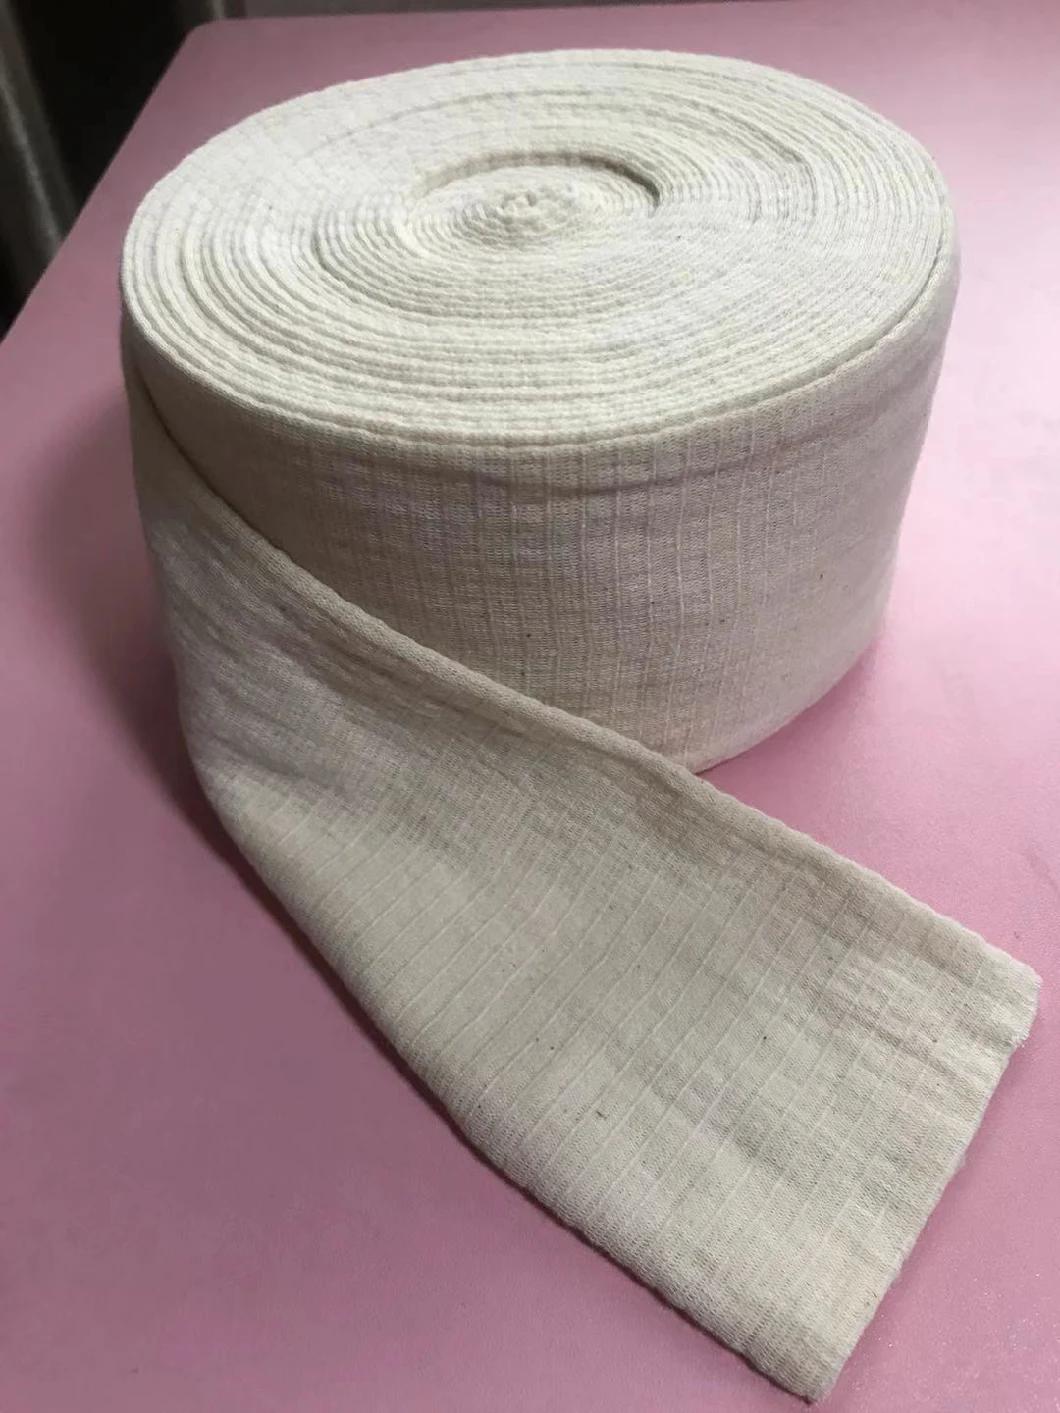 Jr639 Tubular Bandage / Medical Stockinette OEM 100% Cotton Personal Safety Each Piece in One Polybag or Despense Box